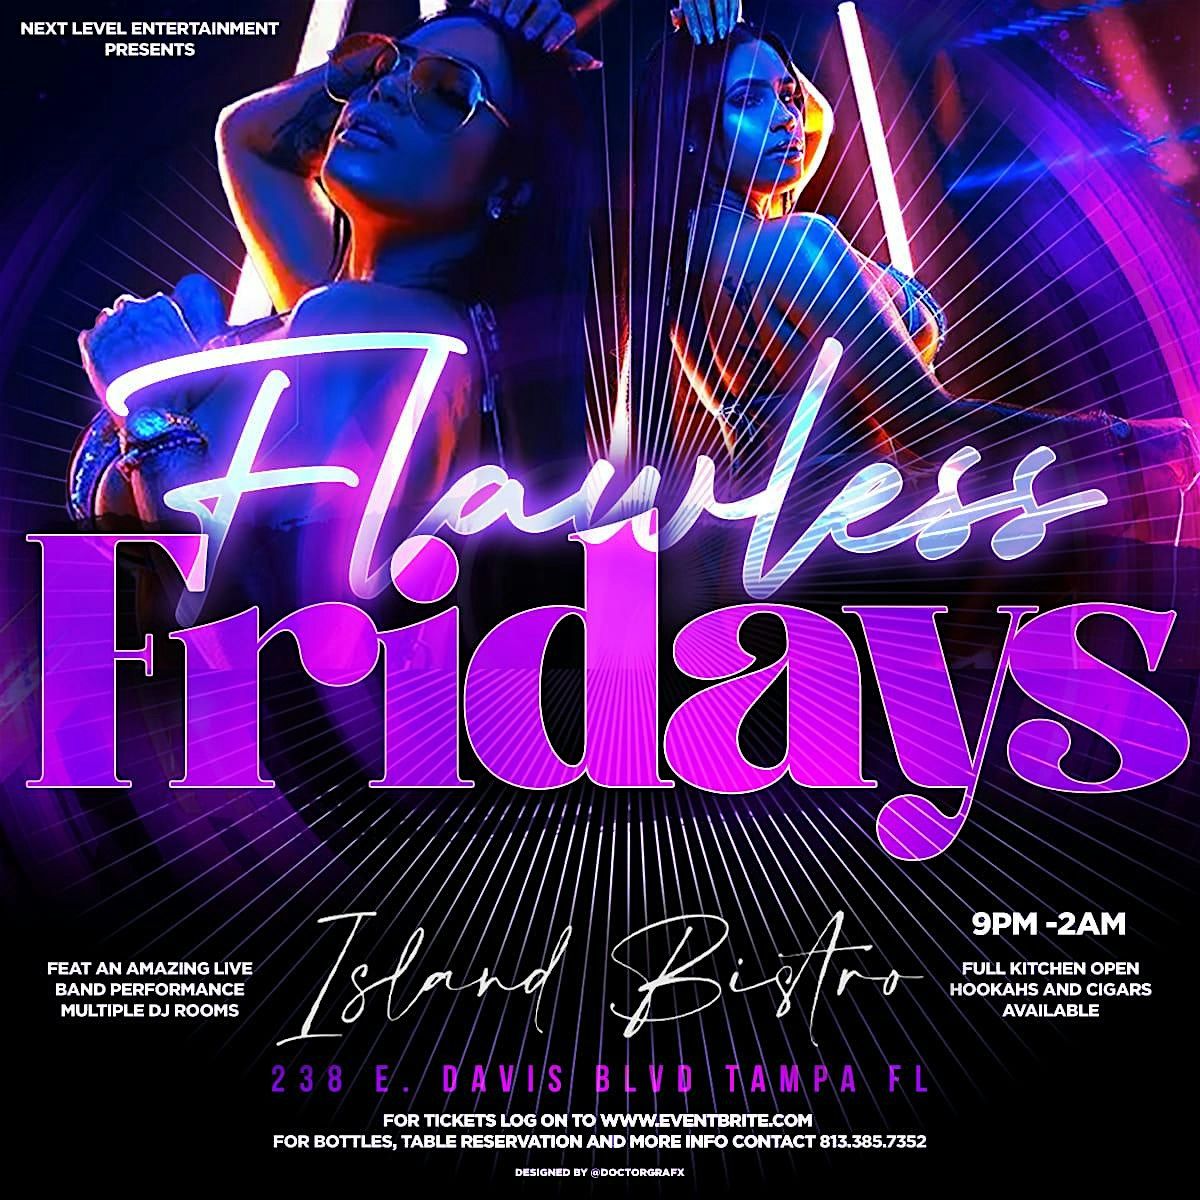 ARE & BEE SOUL SANCTUARY flawless fridays:  TABLE \/ SECTION RESERVATION